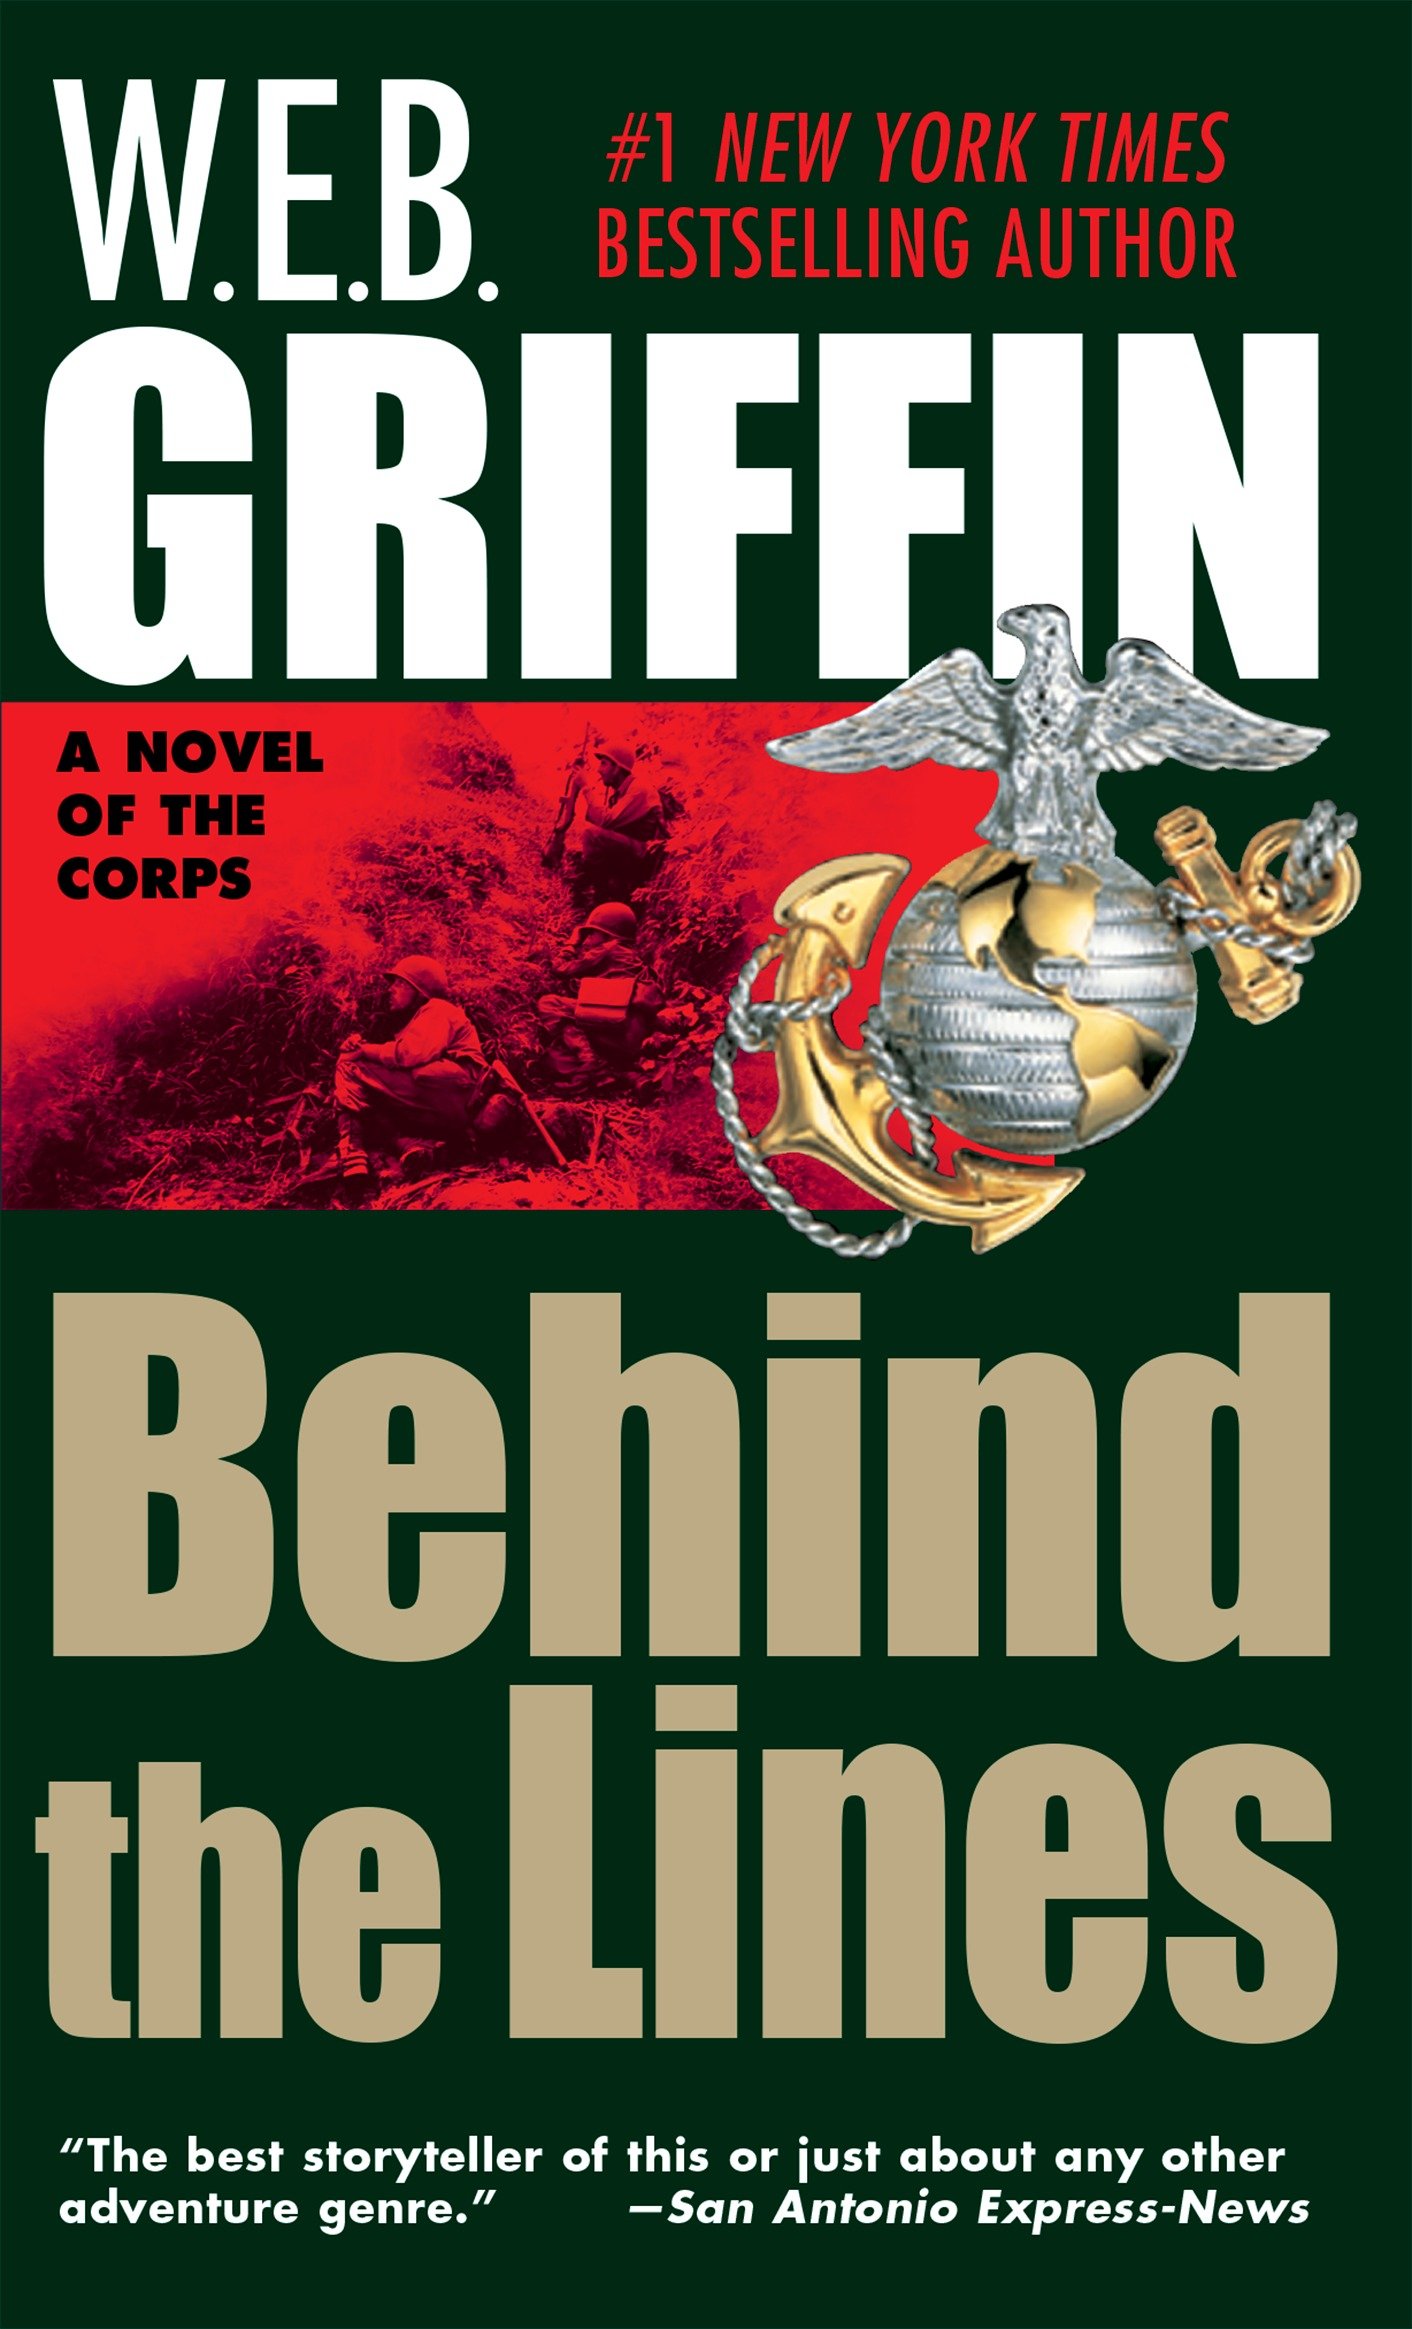 Corps: Behind the Lines (Series #7) (Paperback) - image 1 of 1